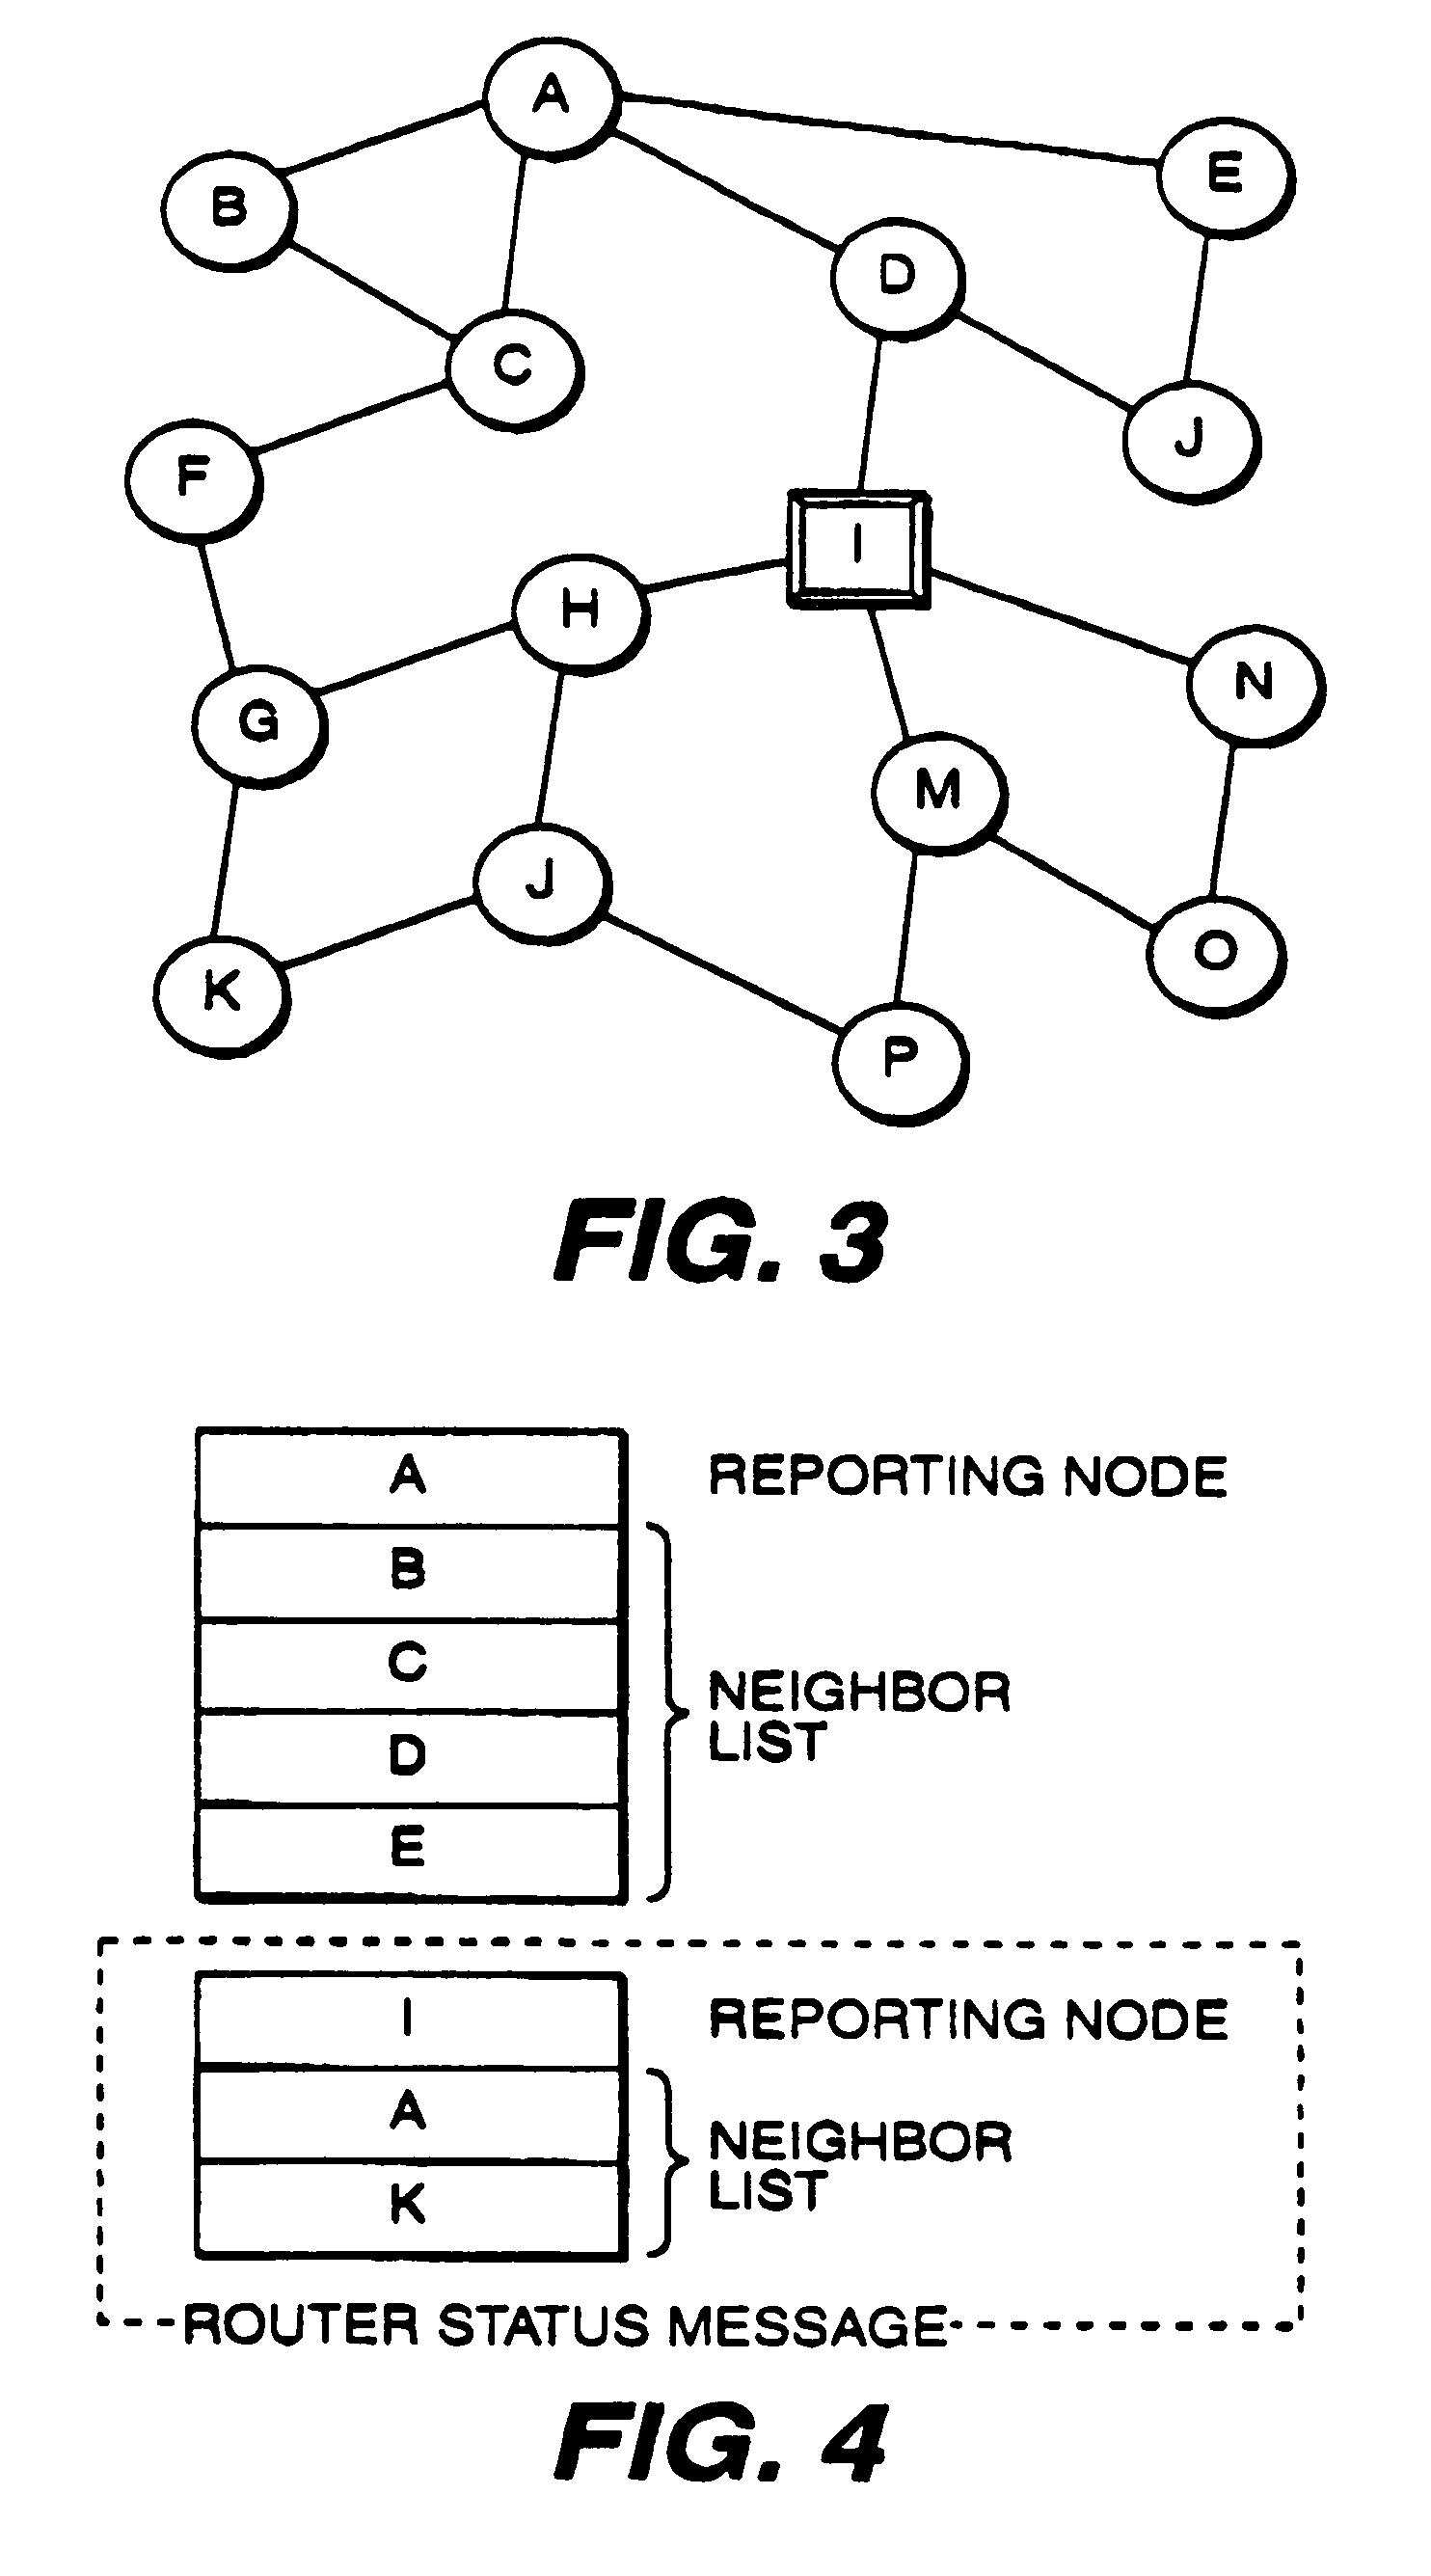 Method and apparatus for detecting unreliable or compromised router/switches in link state routing